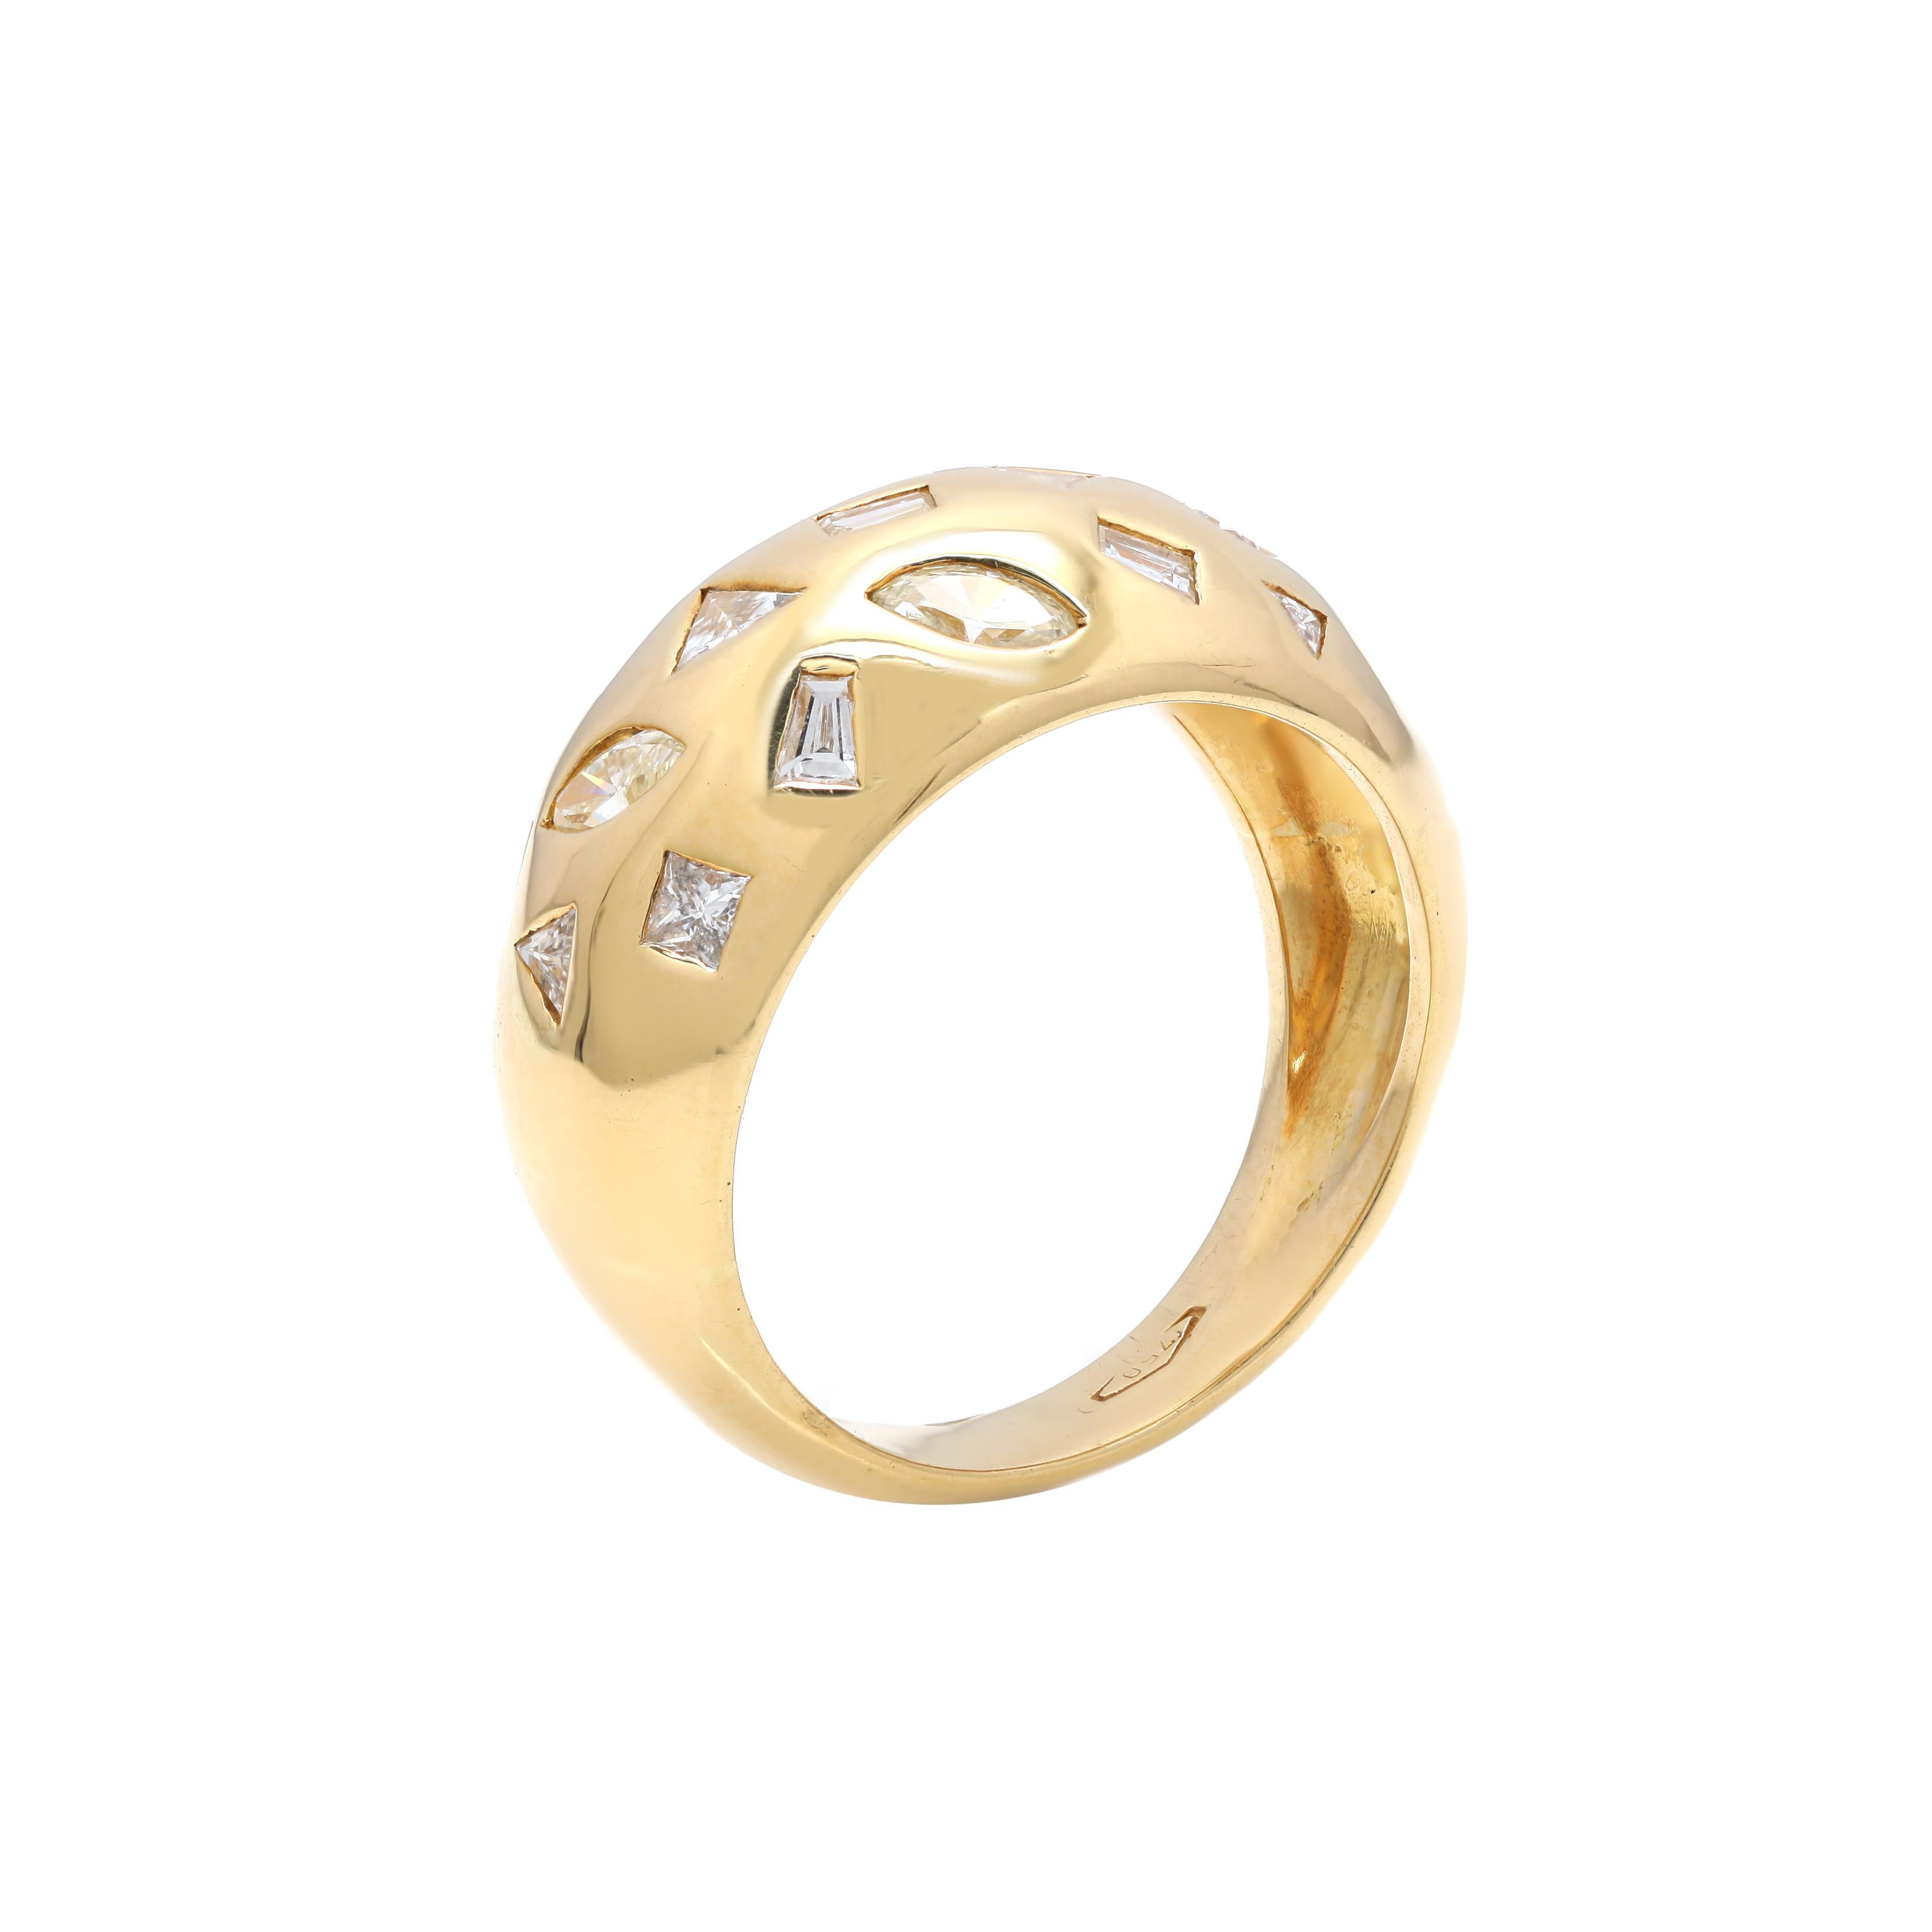 For Sale:  Brilliant 1.2 ct Diamond Studded Dome Ring in Solid 18K Yellow Gold 4